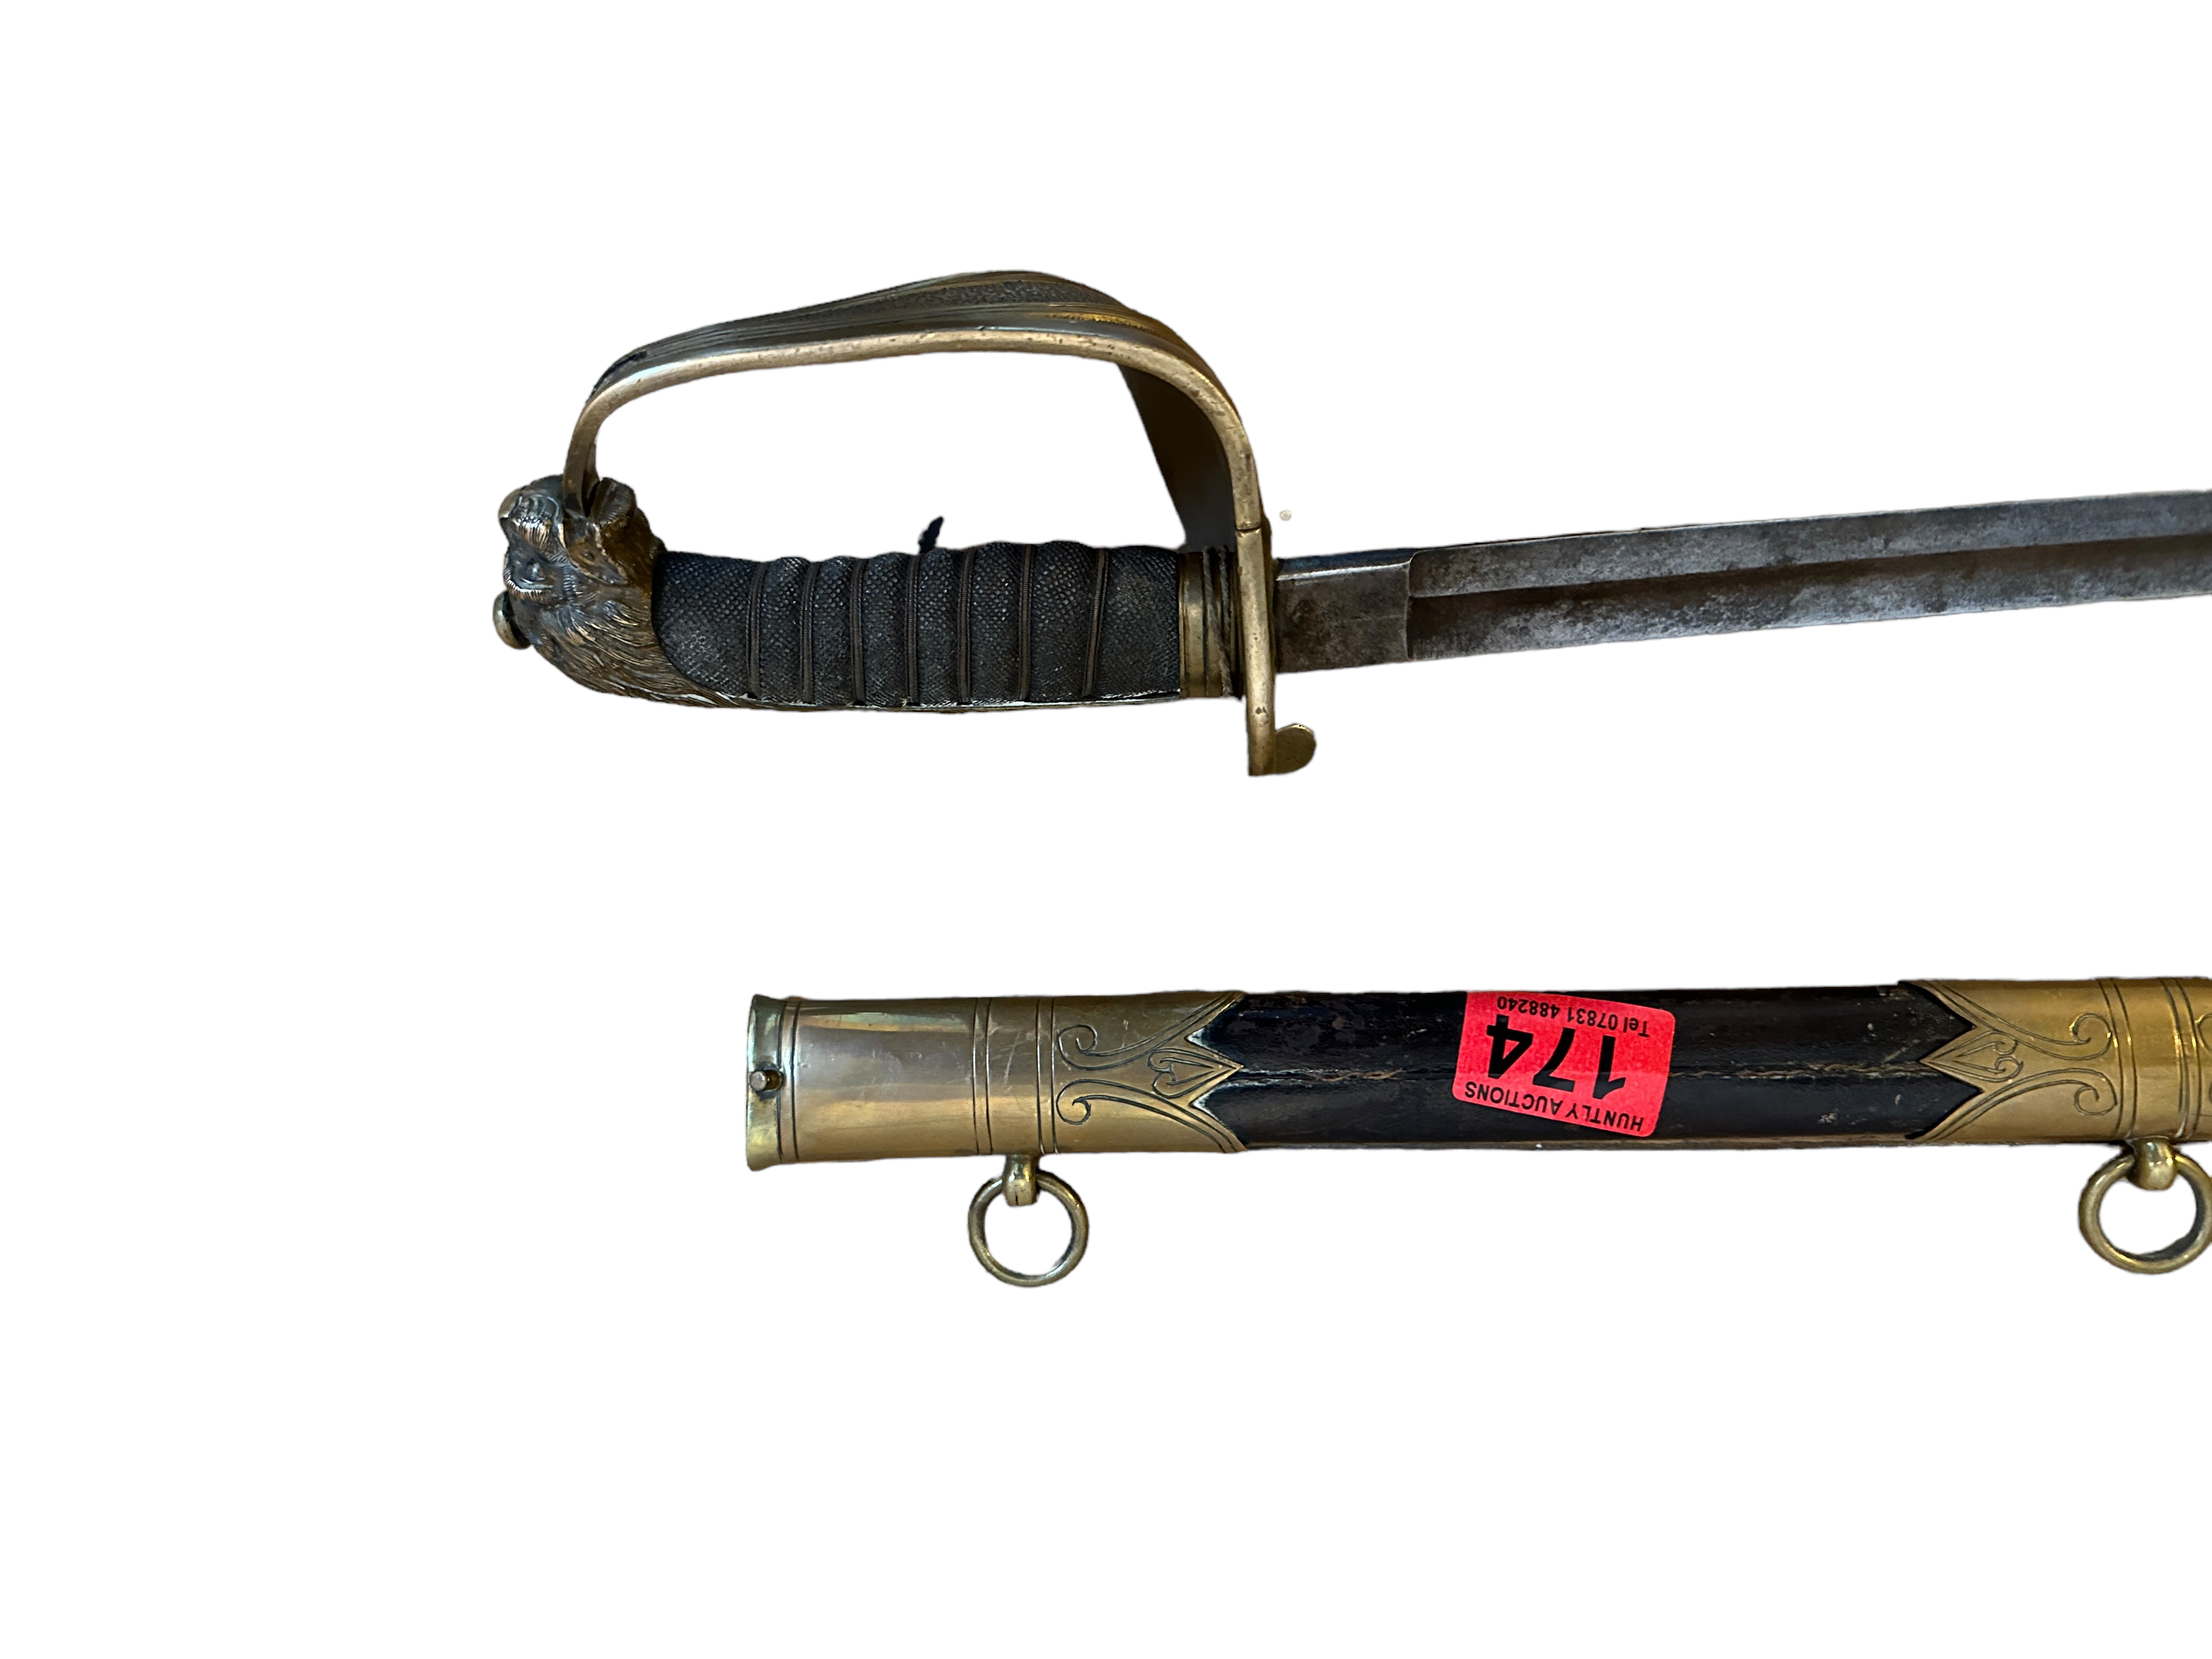 Antique British Naval Sword - blade 32" long and overall length 38". - Image 5 of 5